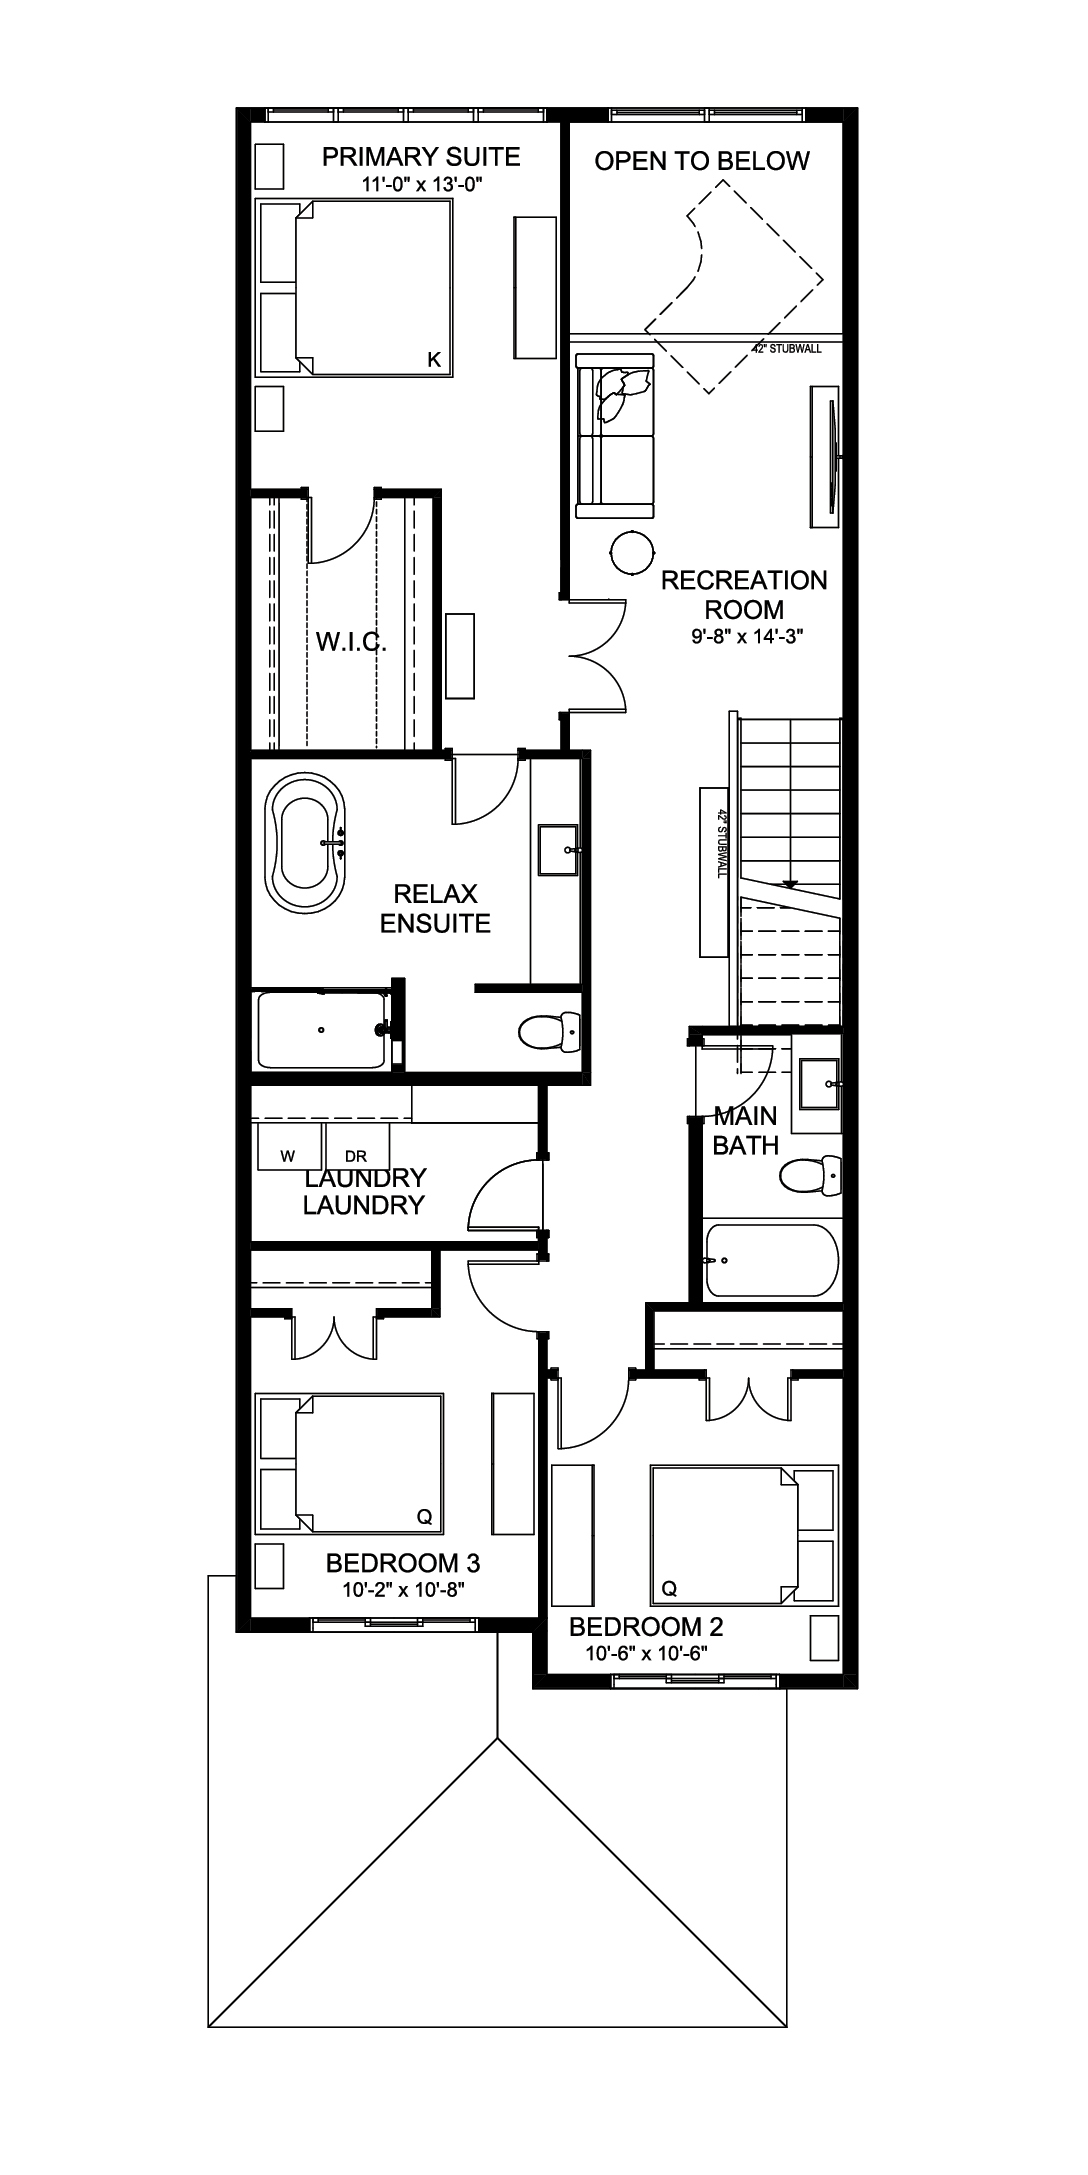 Entertain Play 22 Floor Plan of The Hills at Charlesworth Cantiro Homes with undefined beds